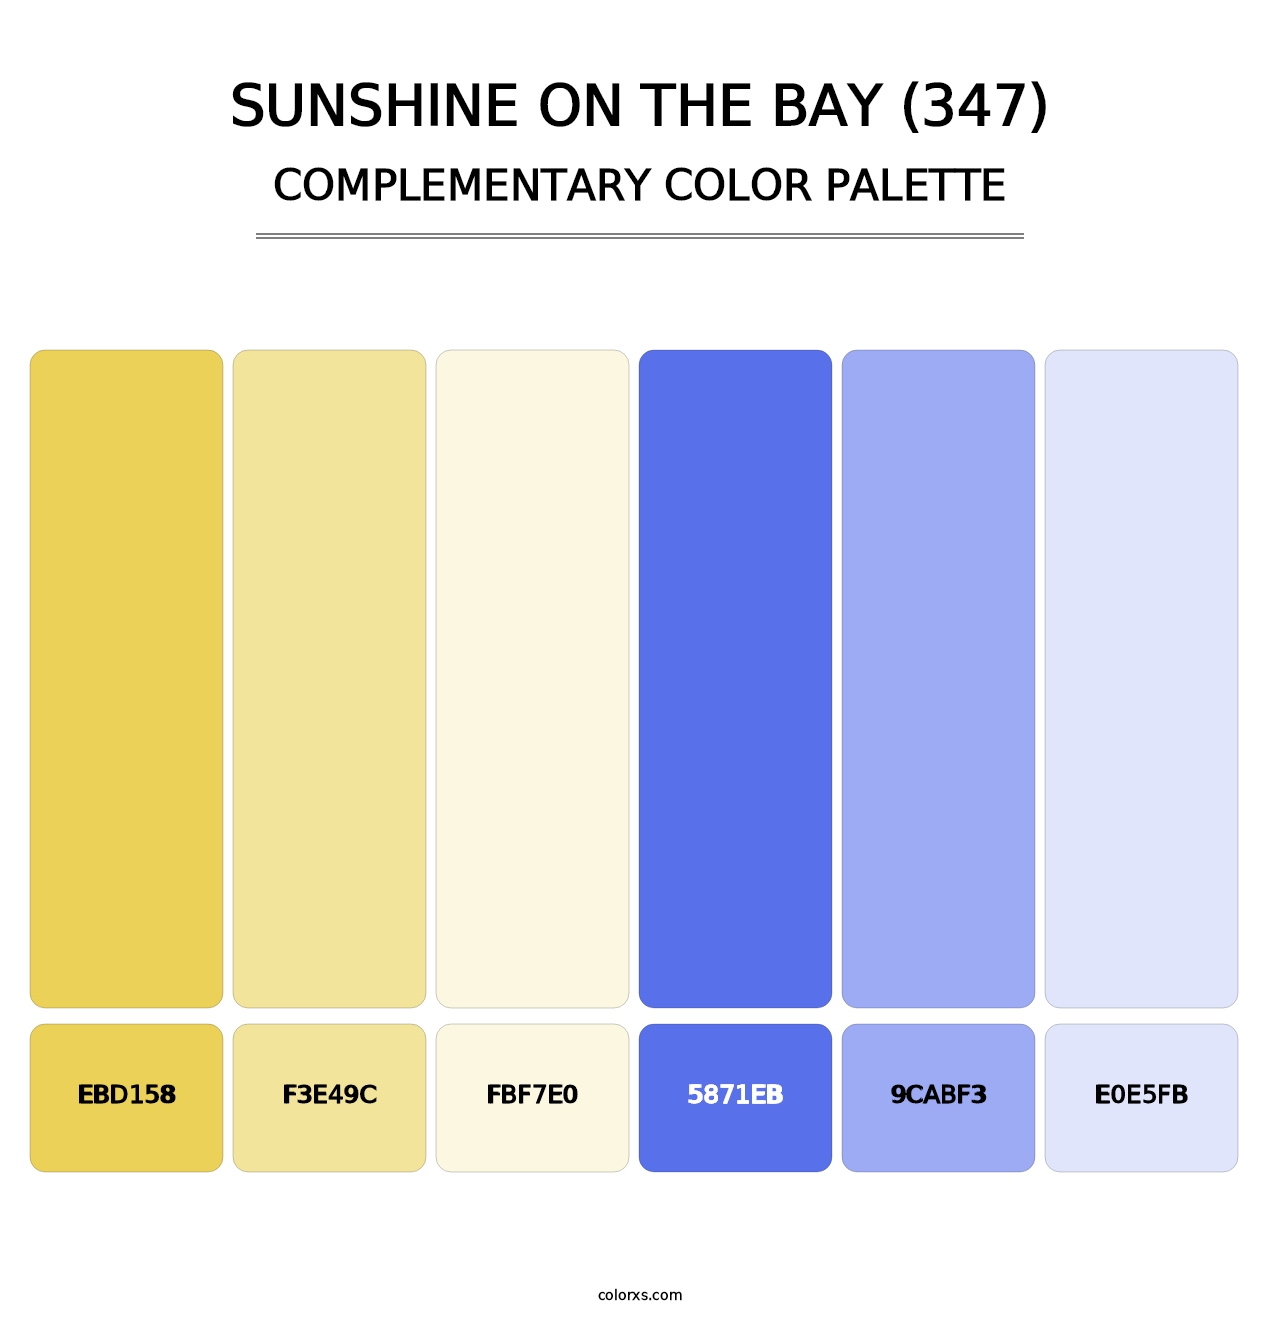 Sunshine on the Bay (347) - Complementary Color Palette